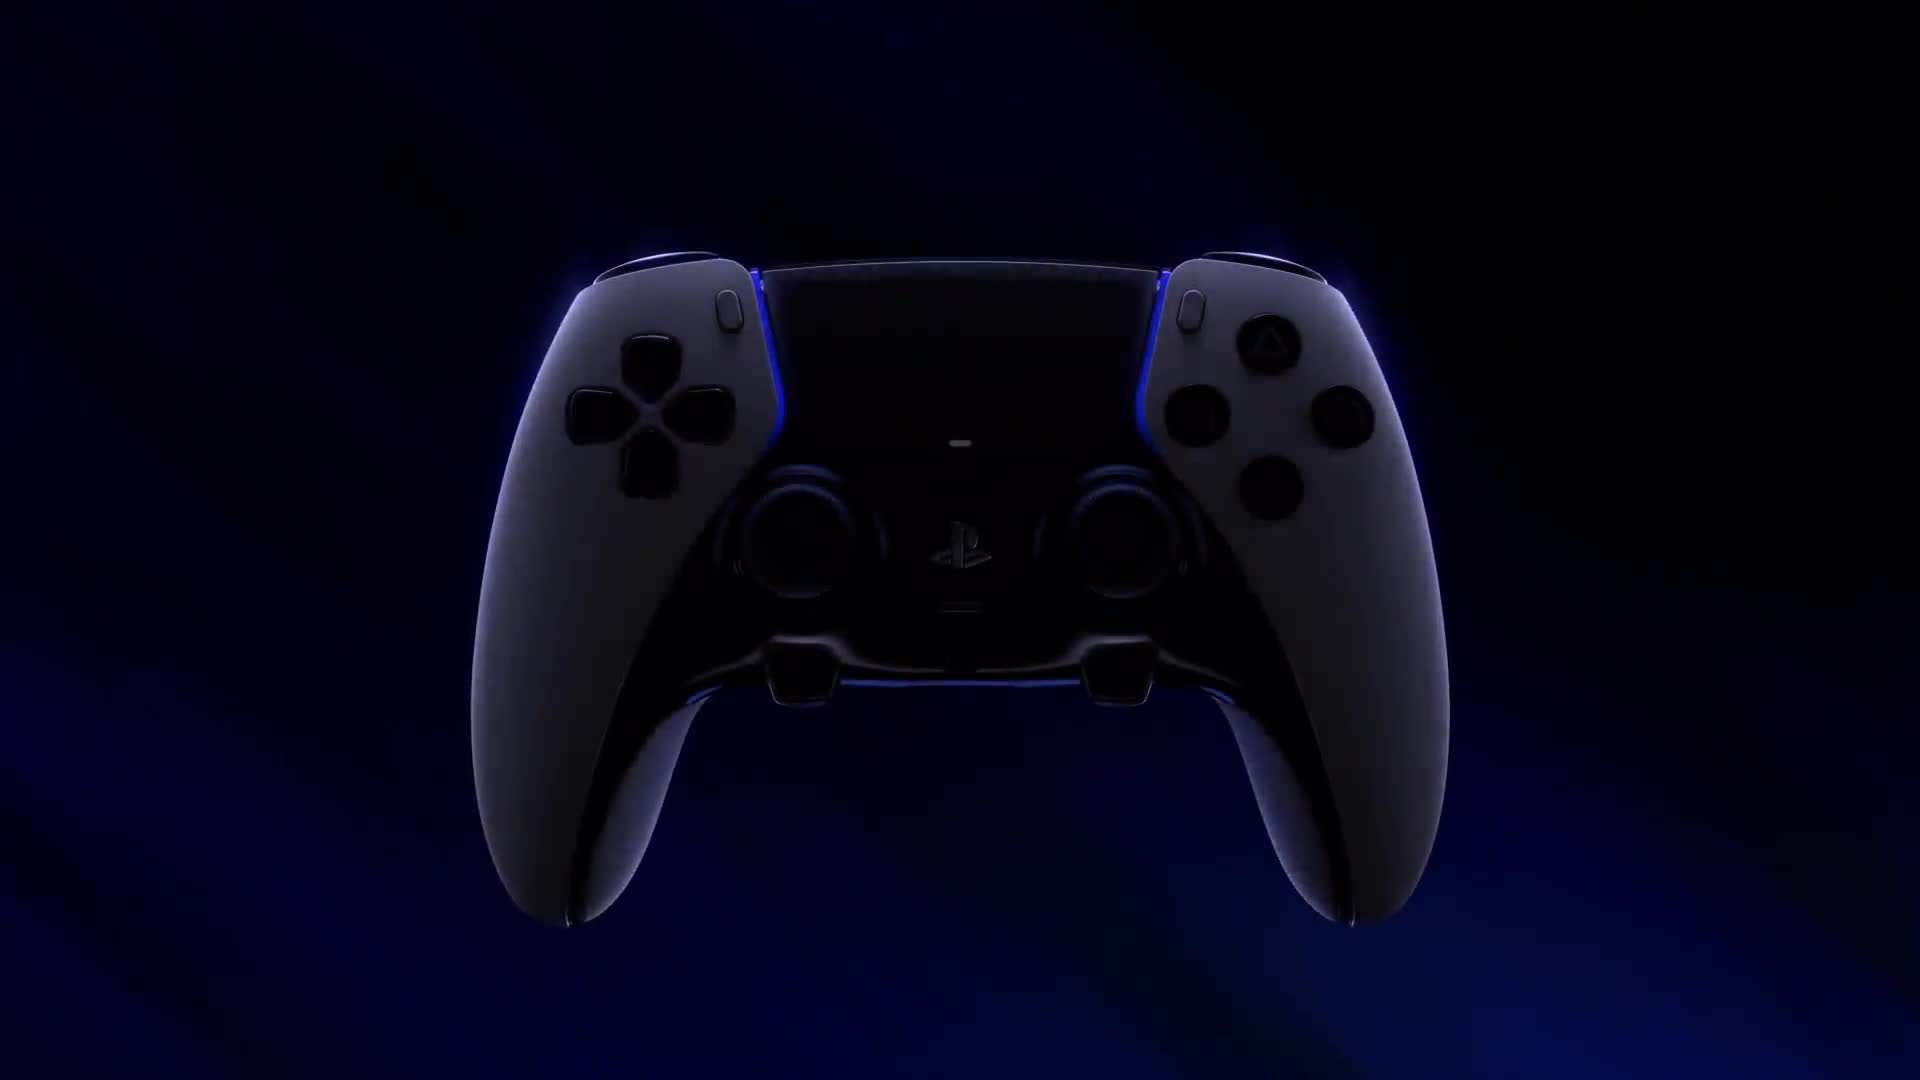 PS5: Trailer for the DualSense Edge - this is the new PlayStation 5 controller